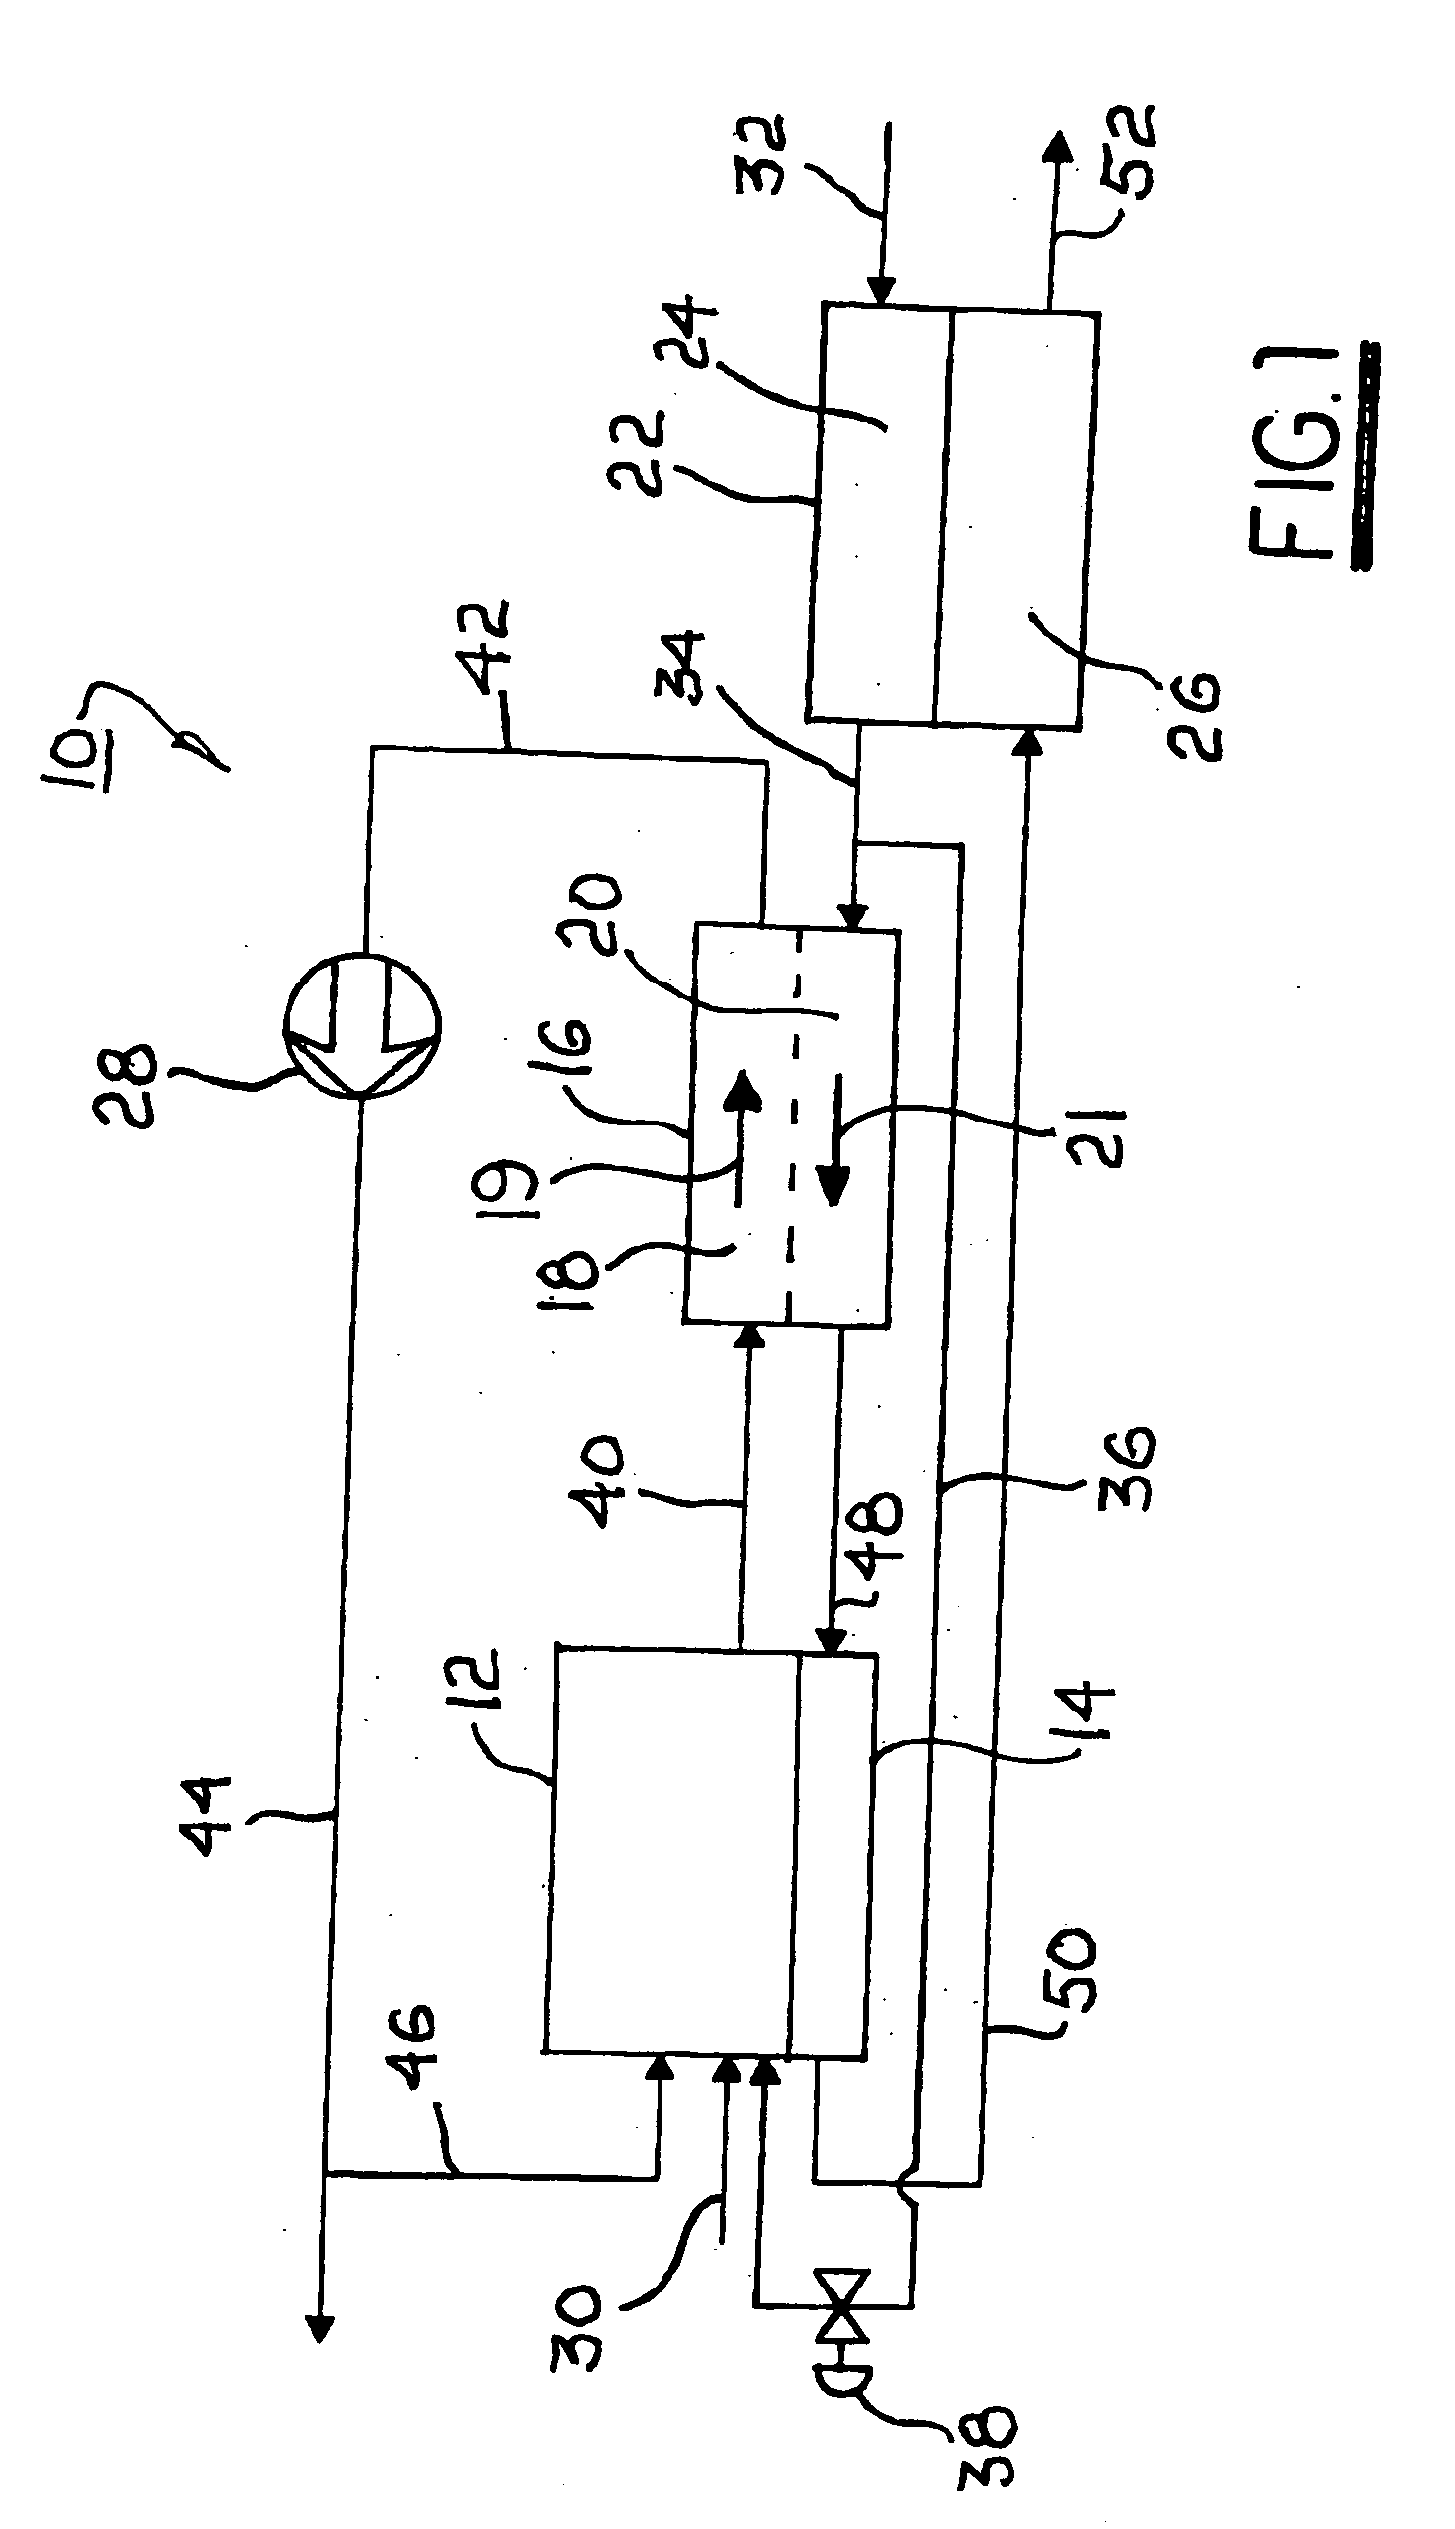 Hybrid power generating system combining a fuel cell and a gas turbine